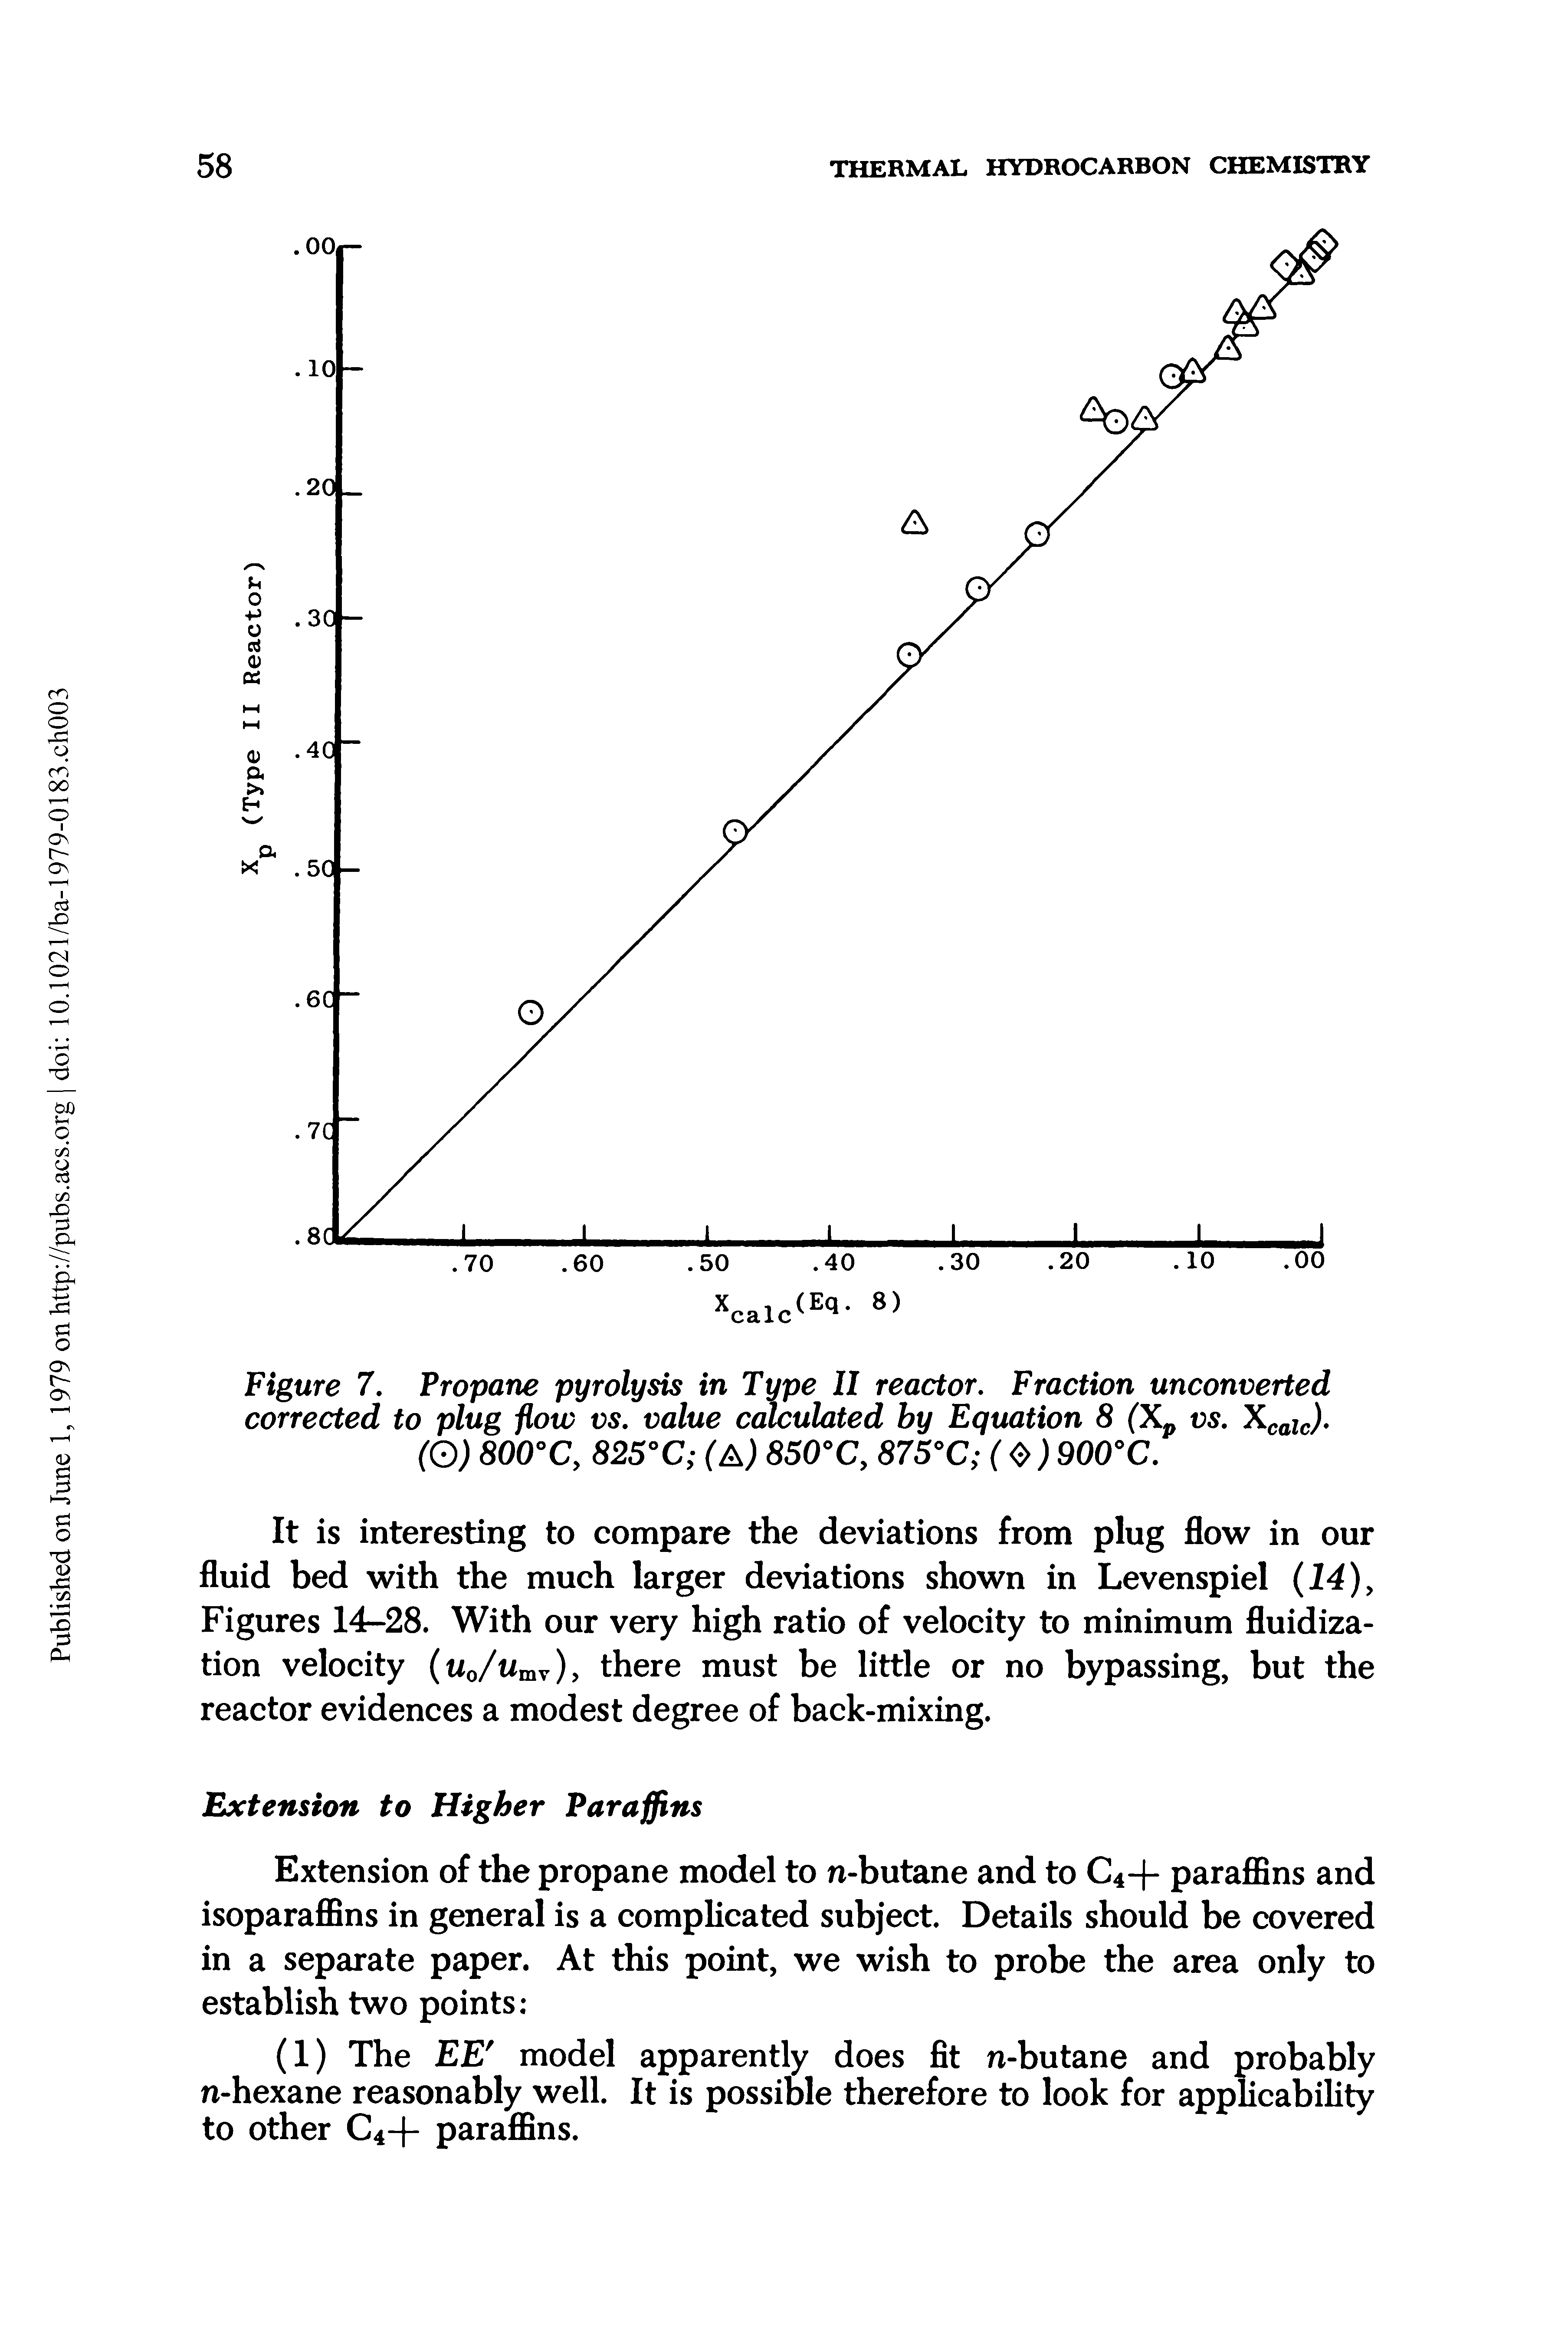 Figure 7. Propane pyrolysis in Type II reactor. Fraction unconverted corrected to plug flow vs. value calculated by Equation 8 (Xp vs. XcaIJ.